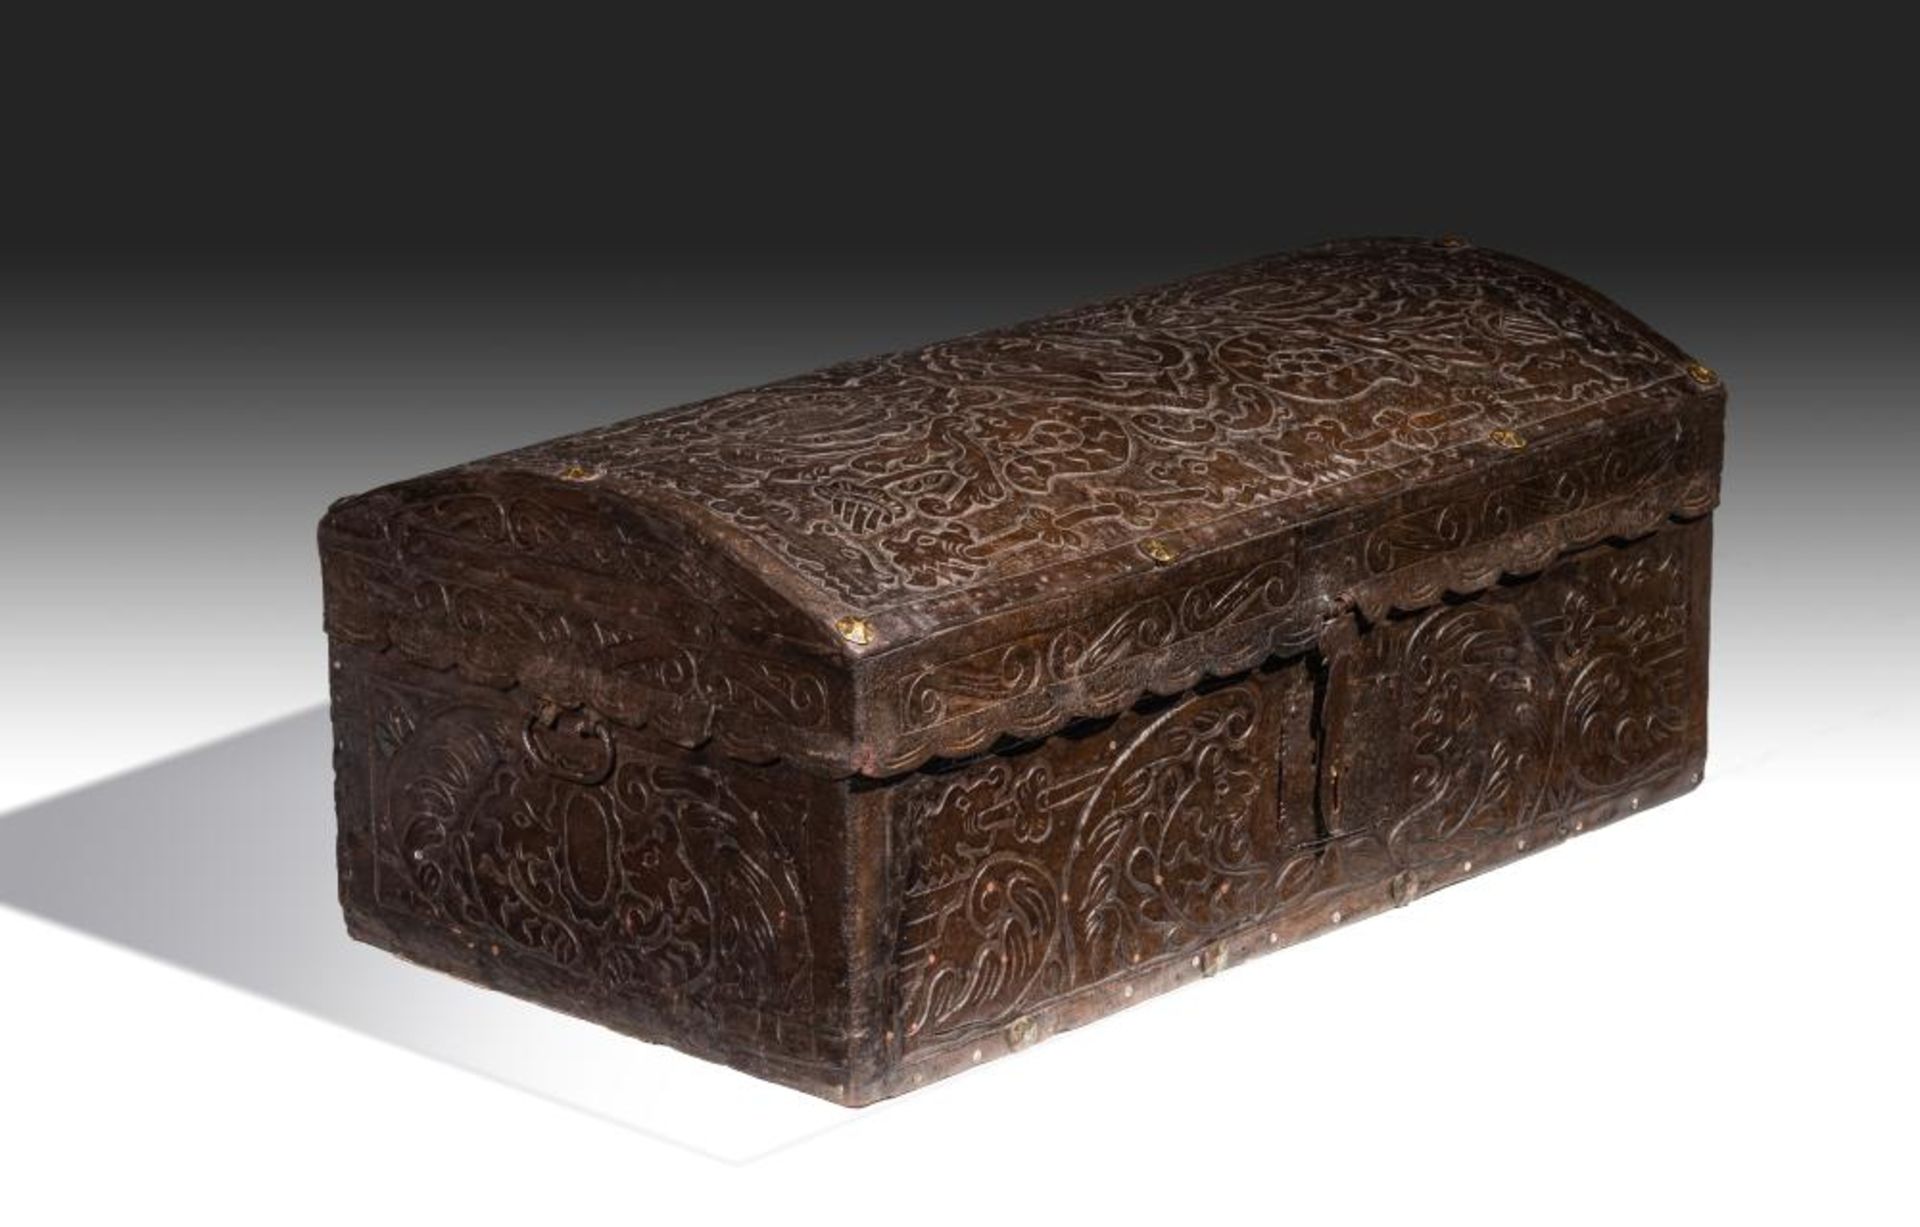 Colonial chest in embossed leather, Peruvian Viceregal work of the 17th century